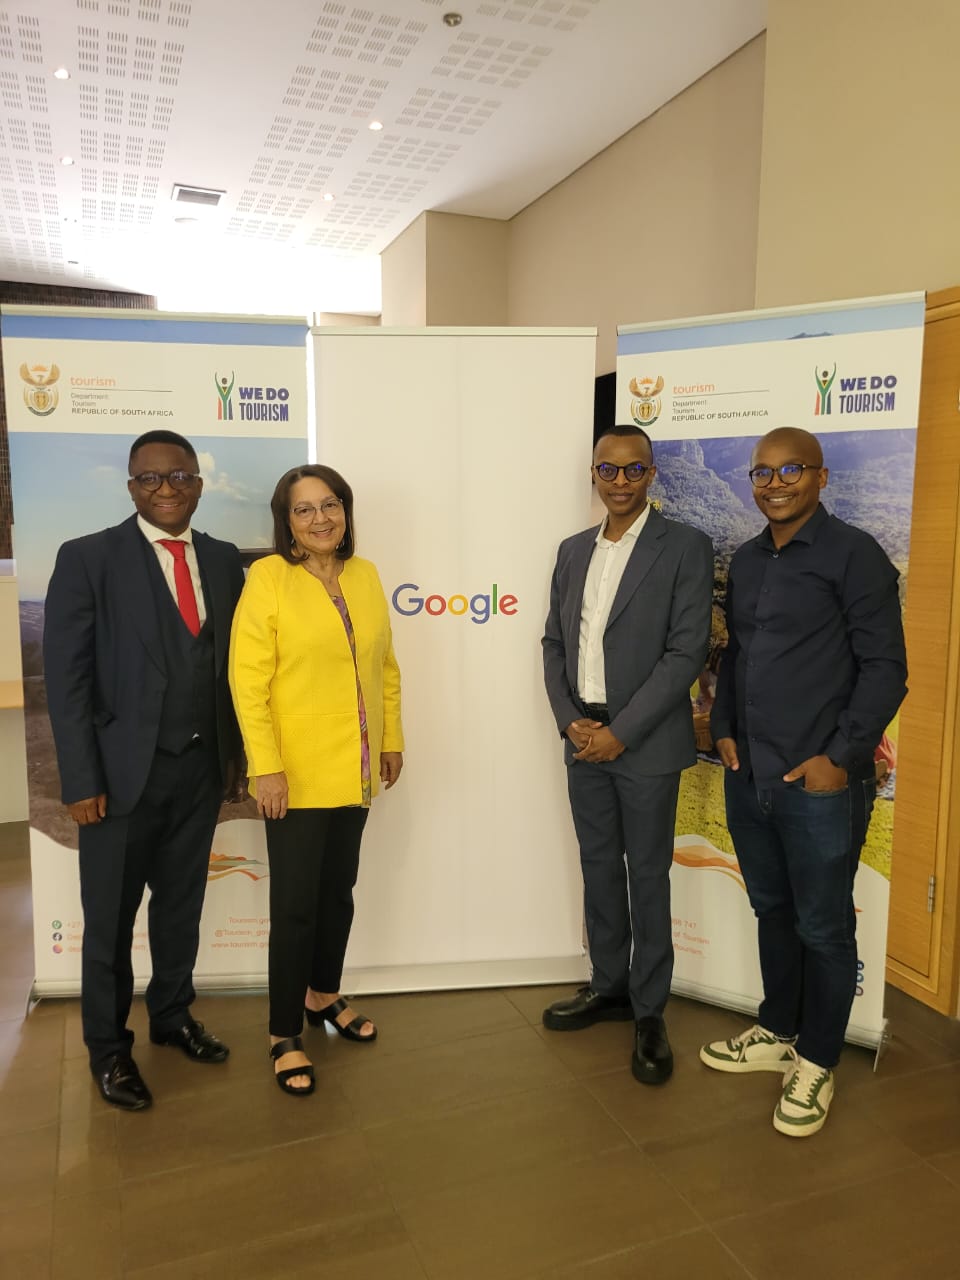 Minister of Tourism, Patricia de Lille and Google sign collaborative agreement